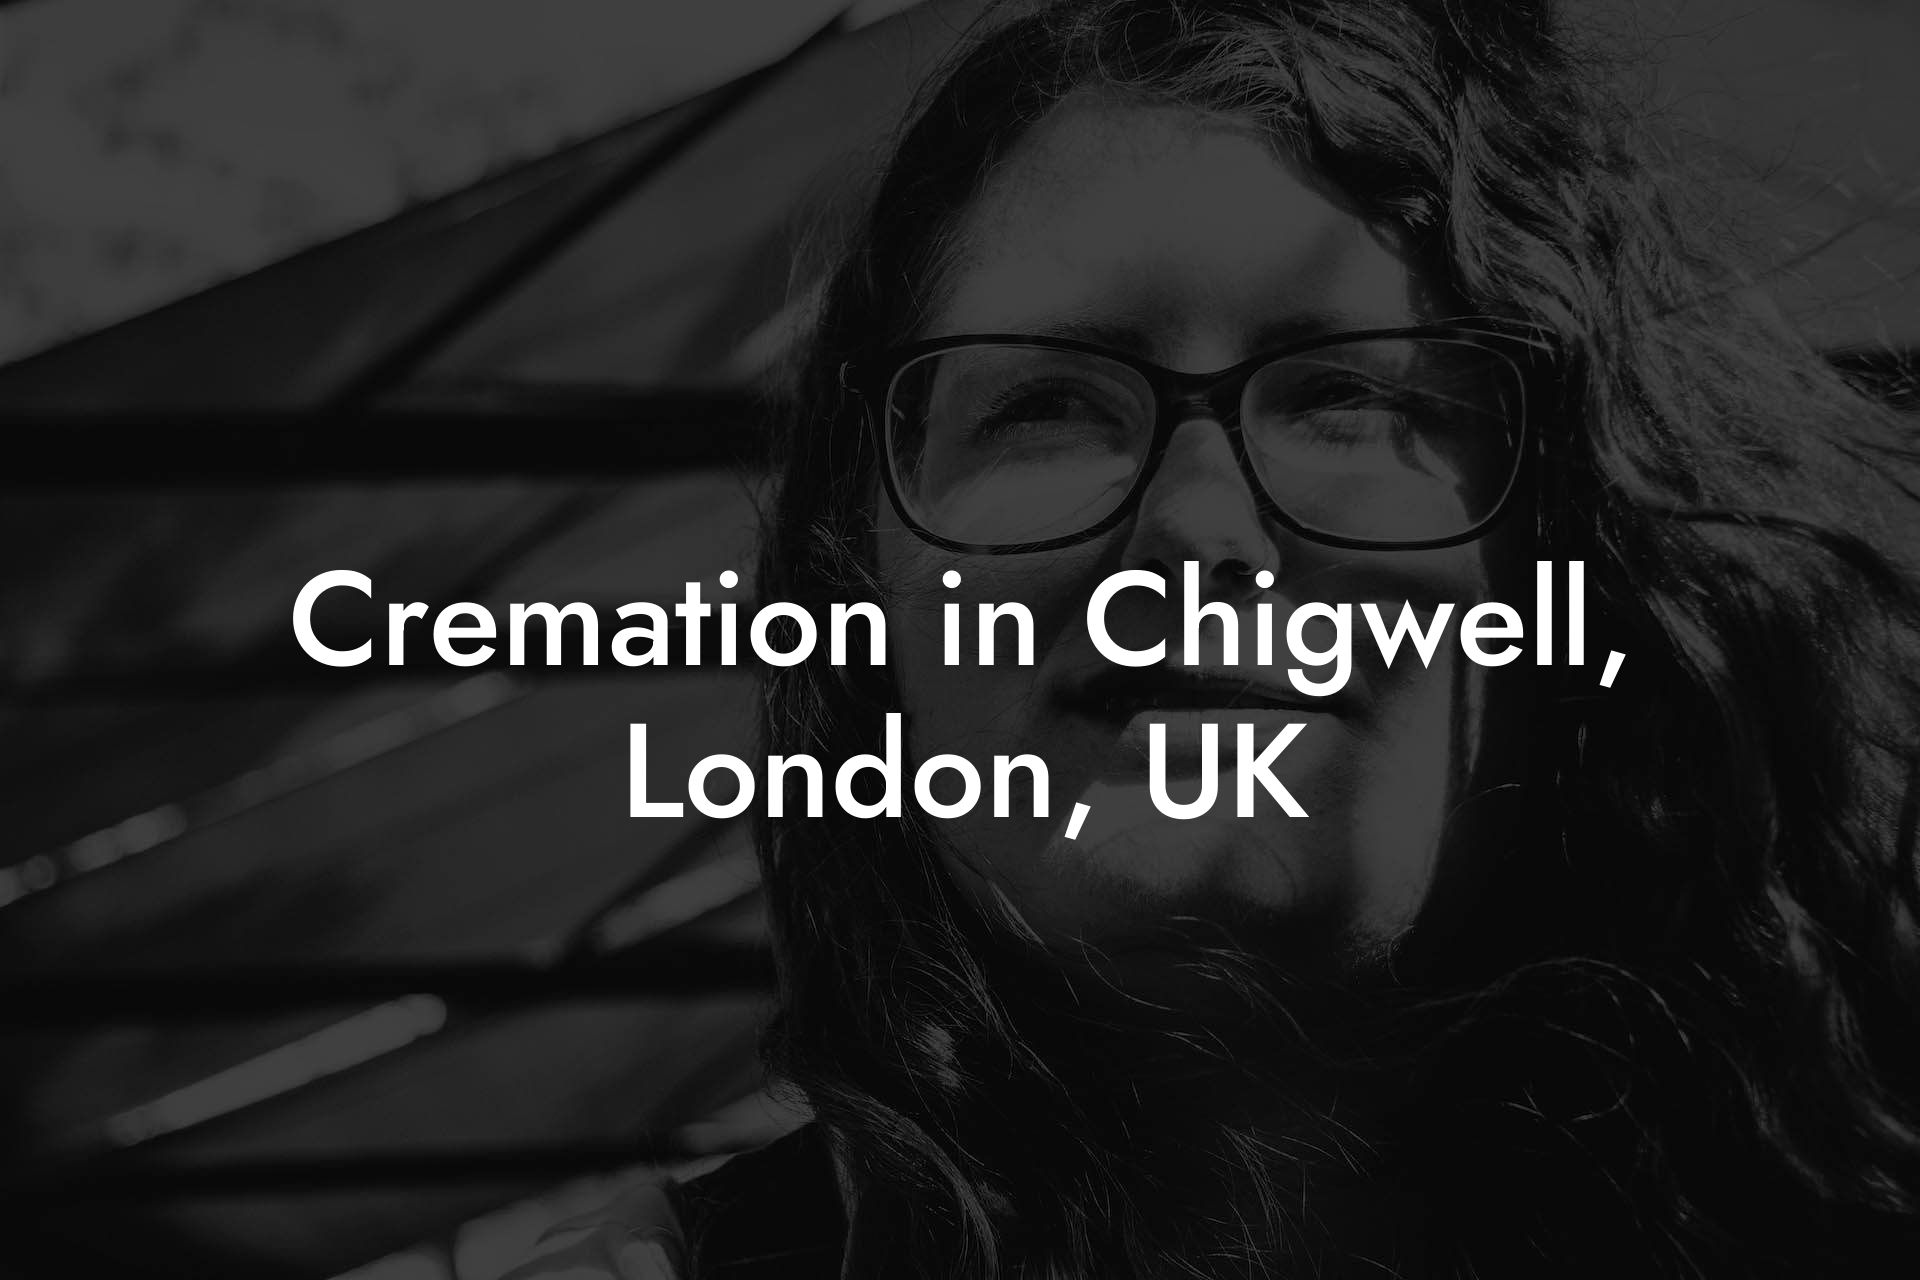 Cremation in Chigwell, London, UK